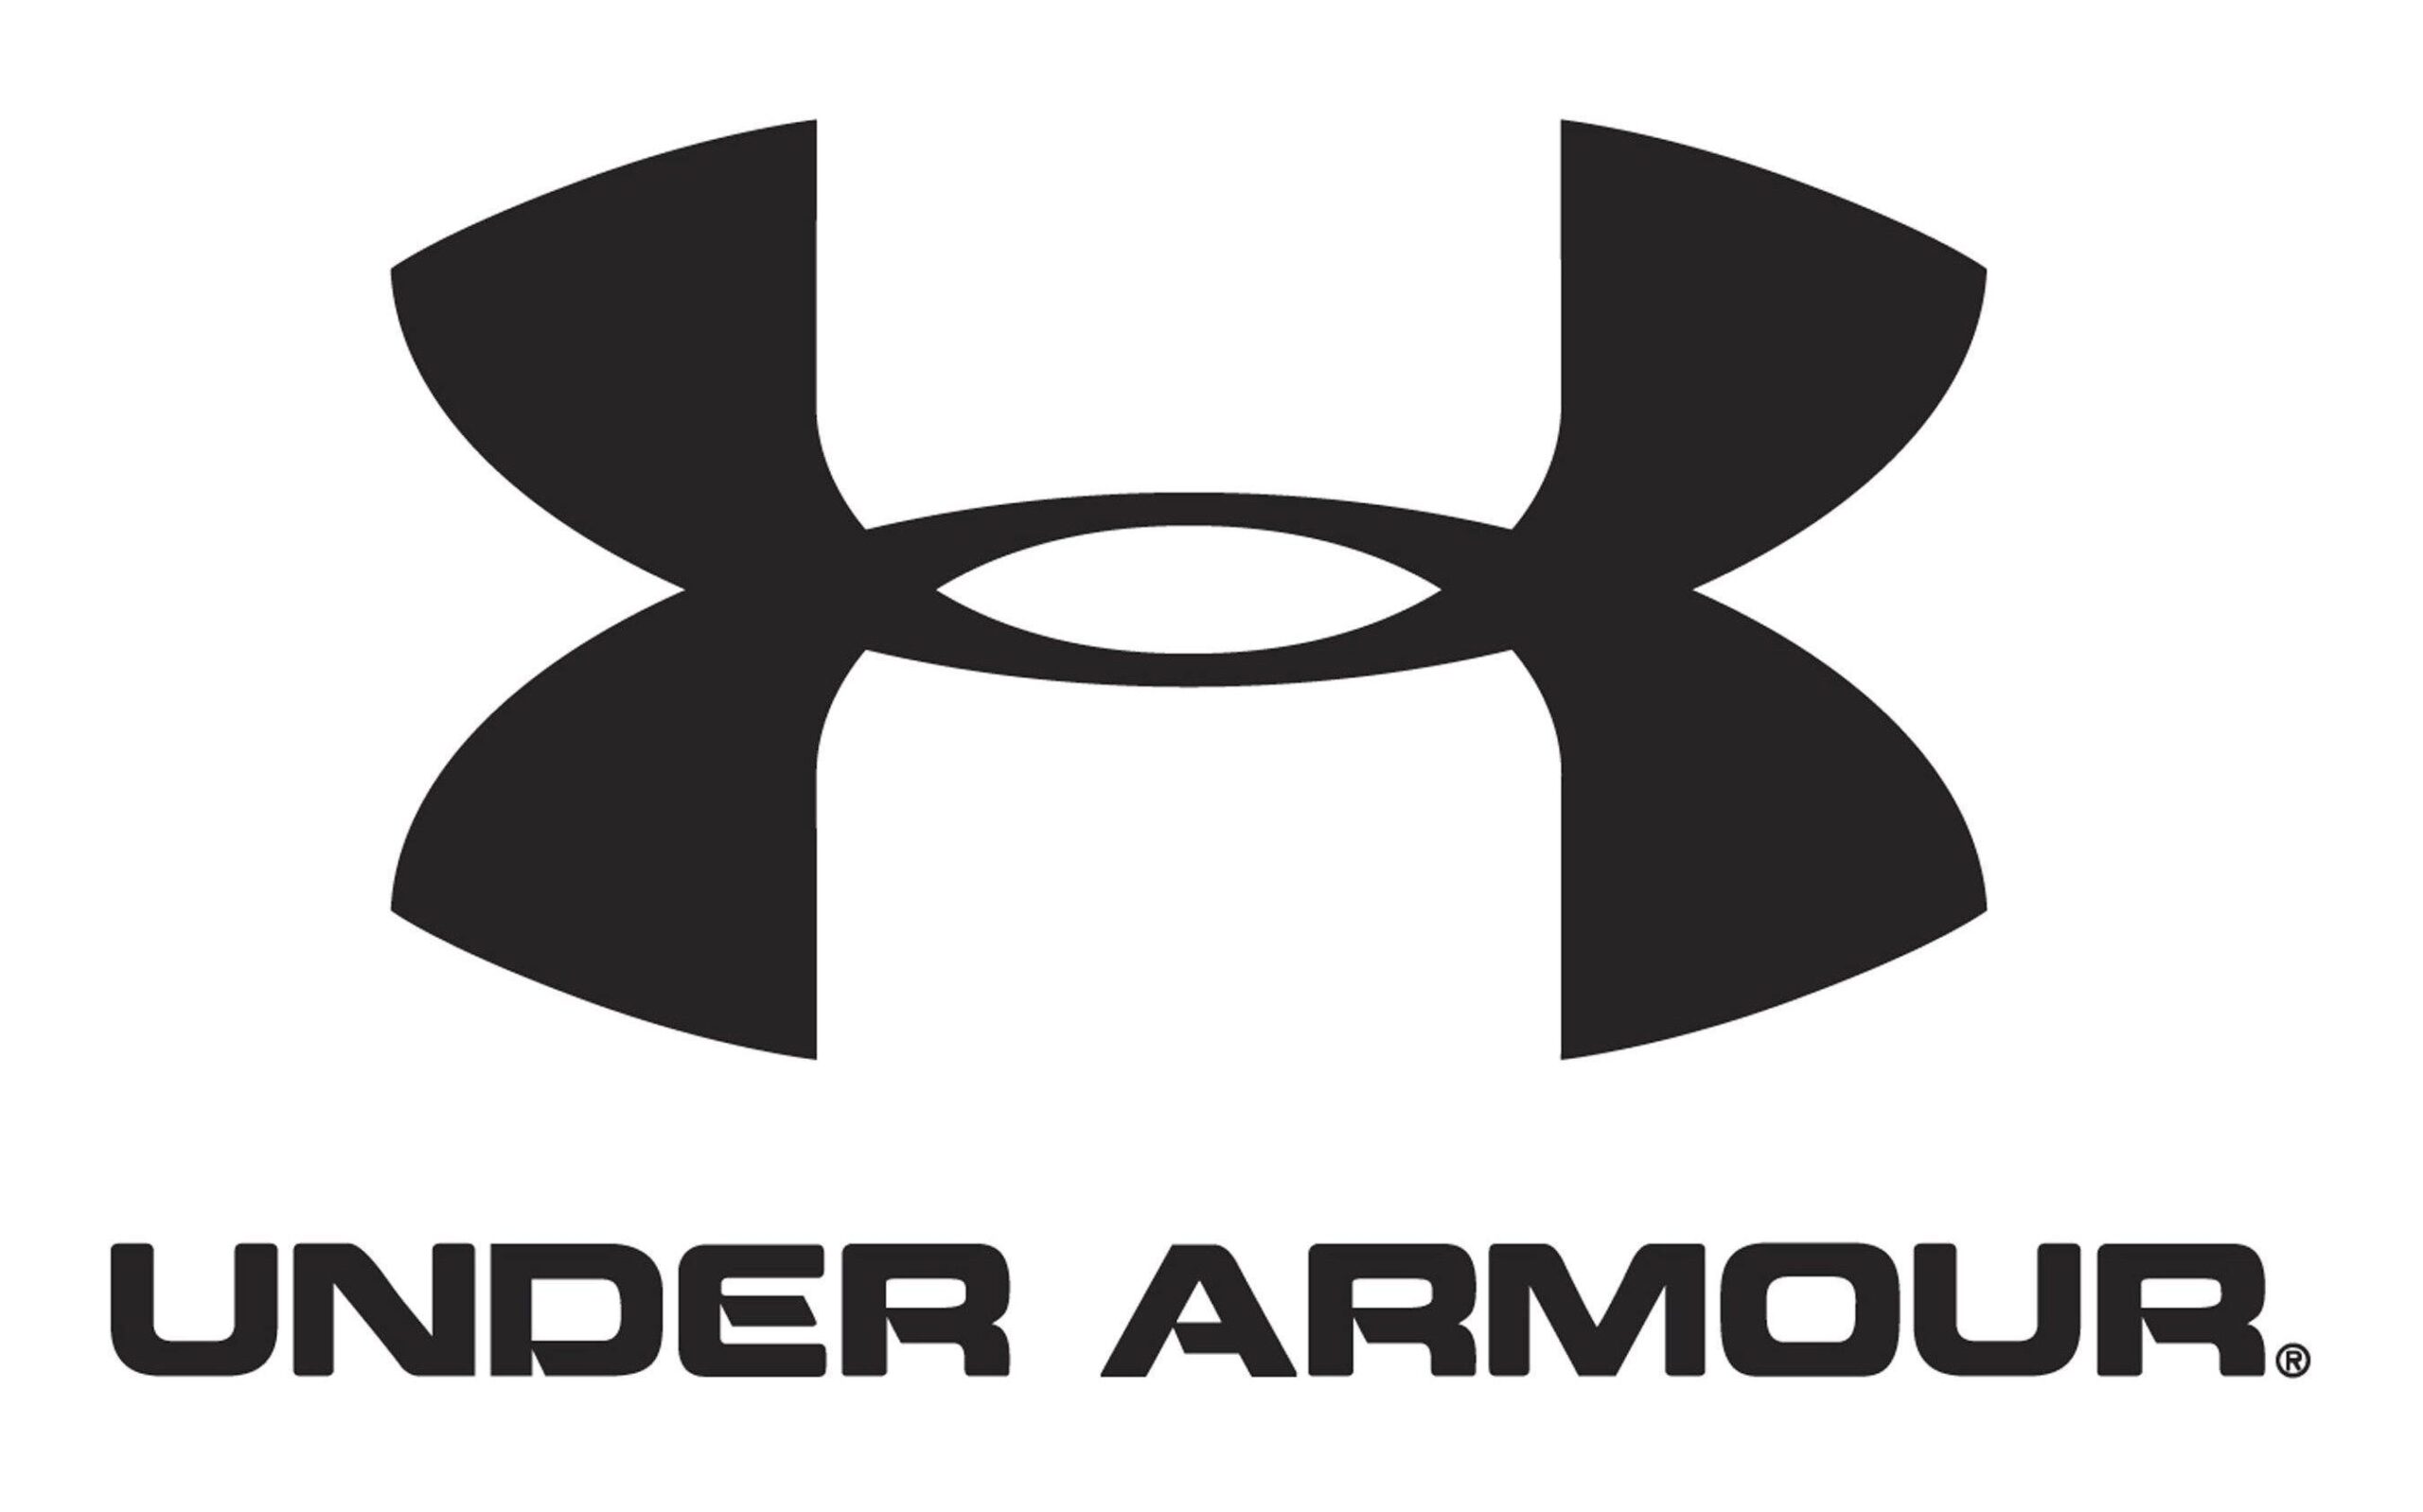 Under Armour Best Wallpaper Hd For Pc, Under Armour, Other